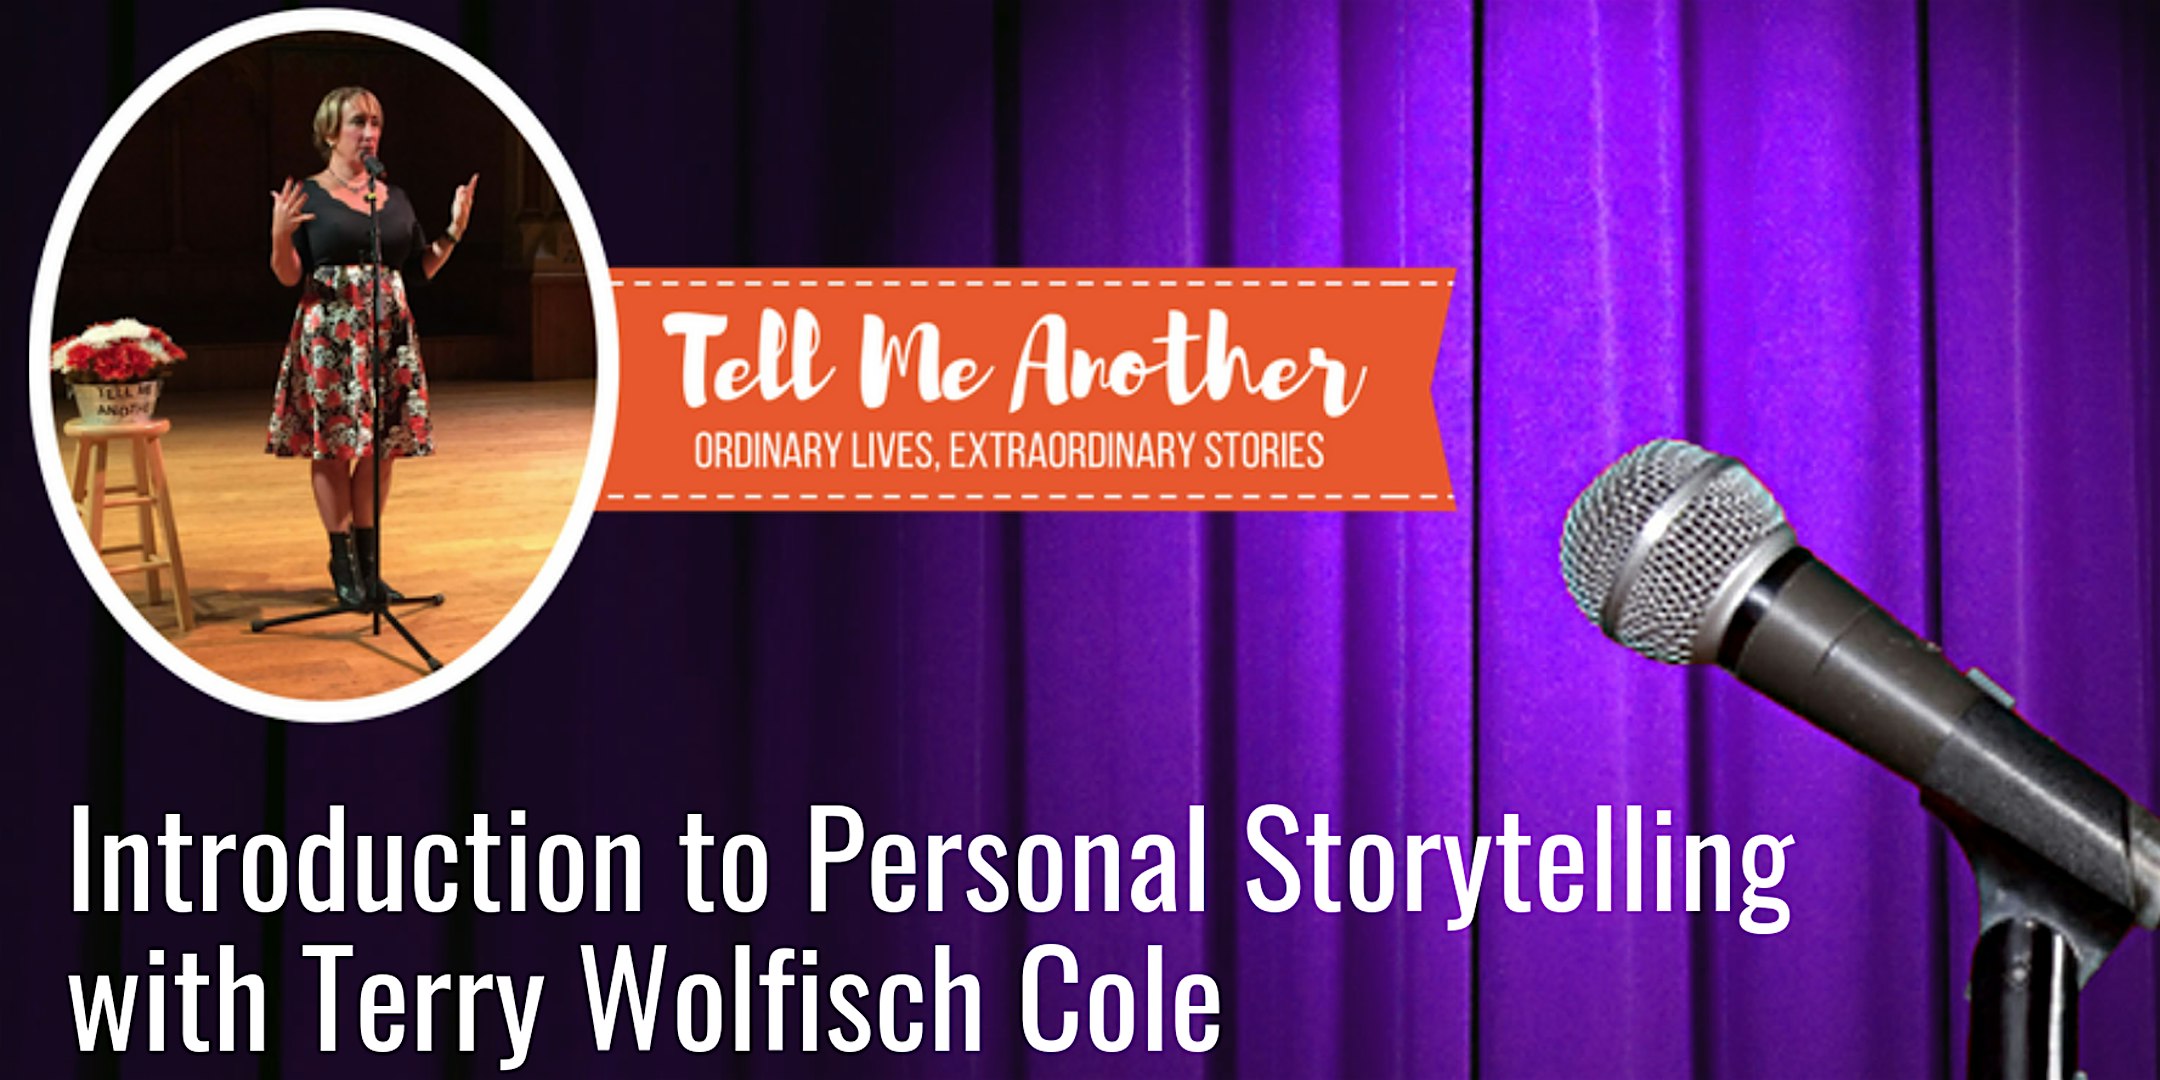 Introduction to Personal Storytelling with Terry Wolfisch Cole